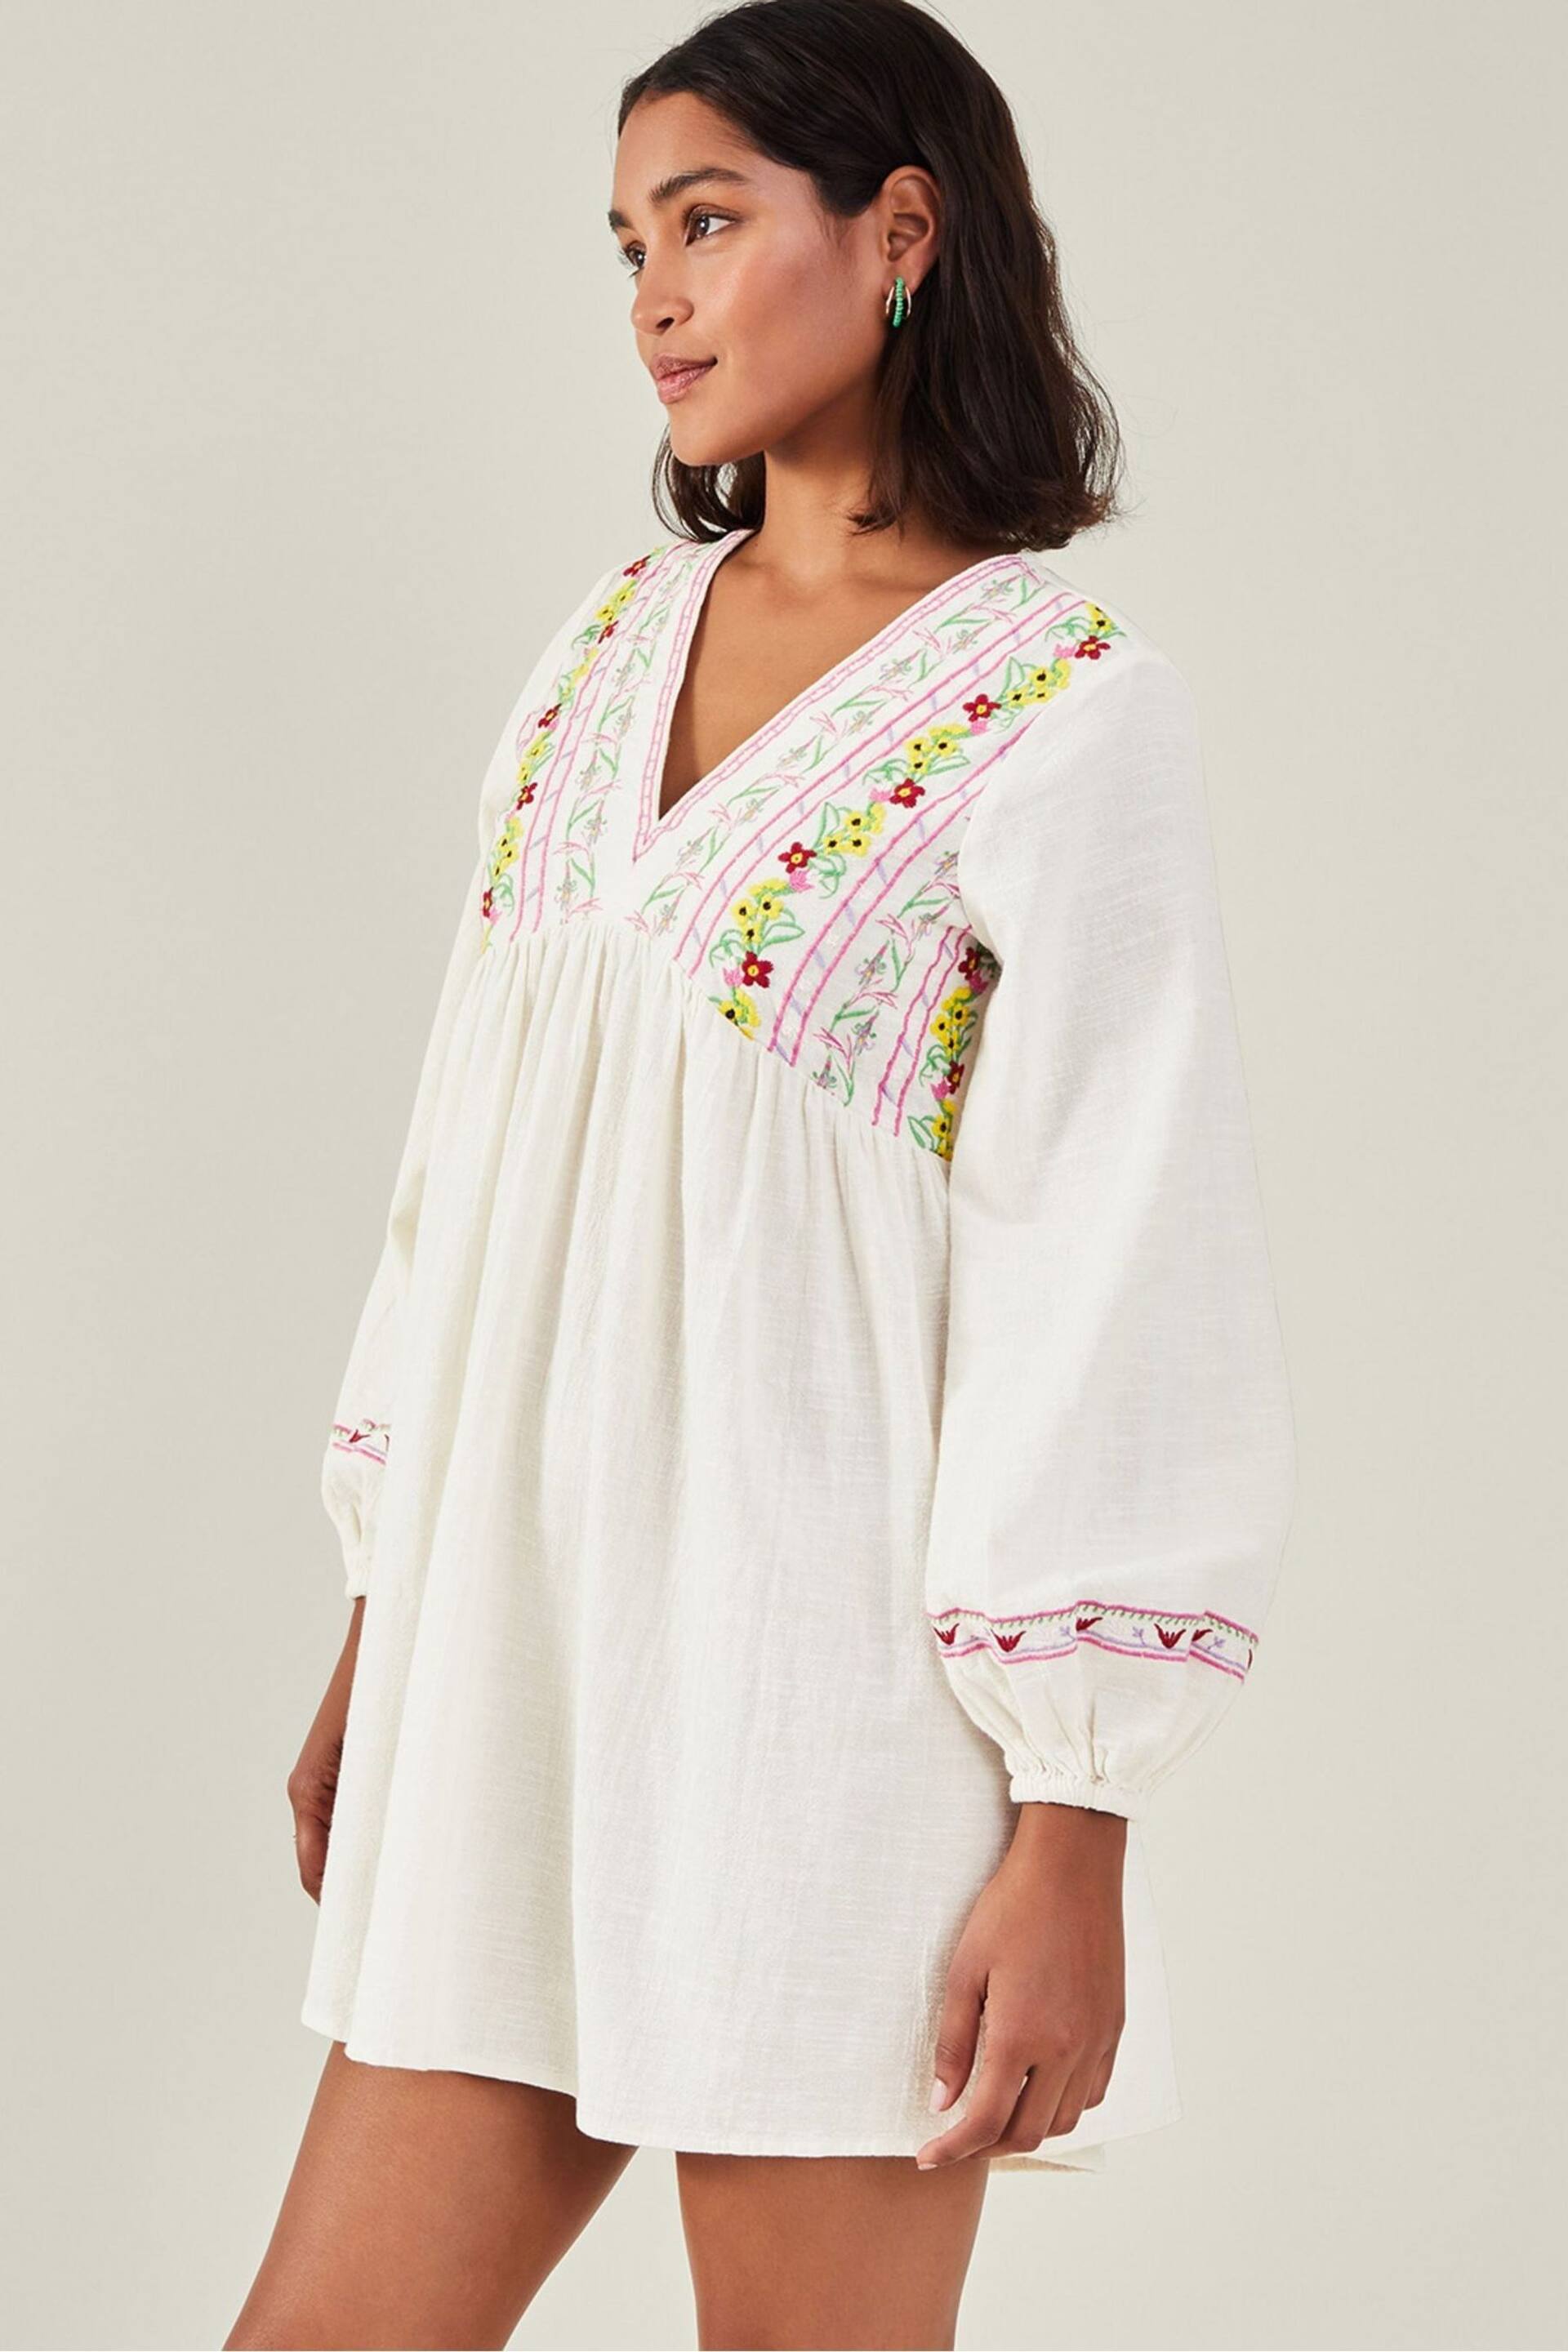 Accessorize Natural Floral Embroidered Mini Dress - Image 1 of 3